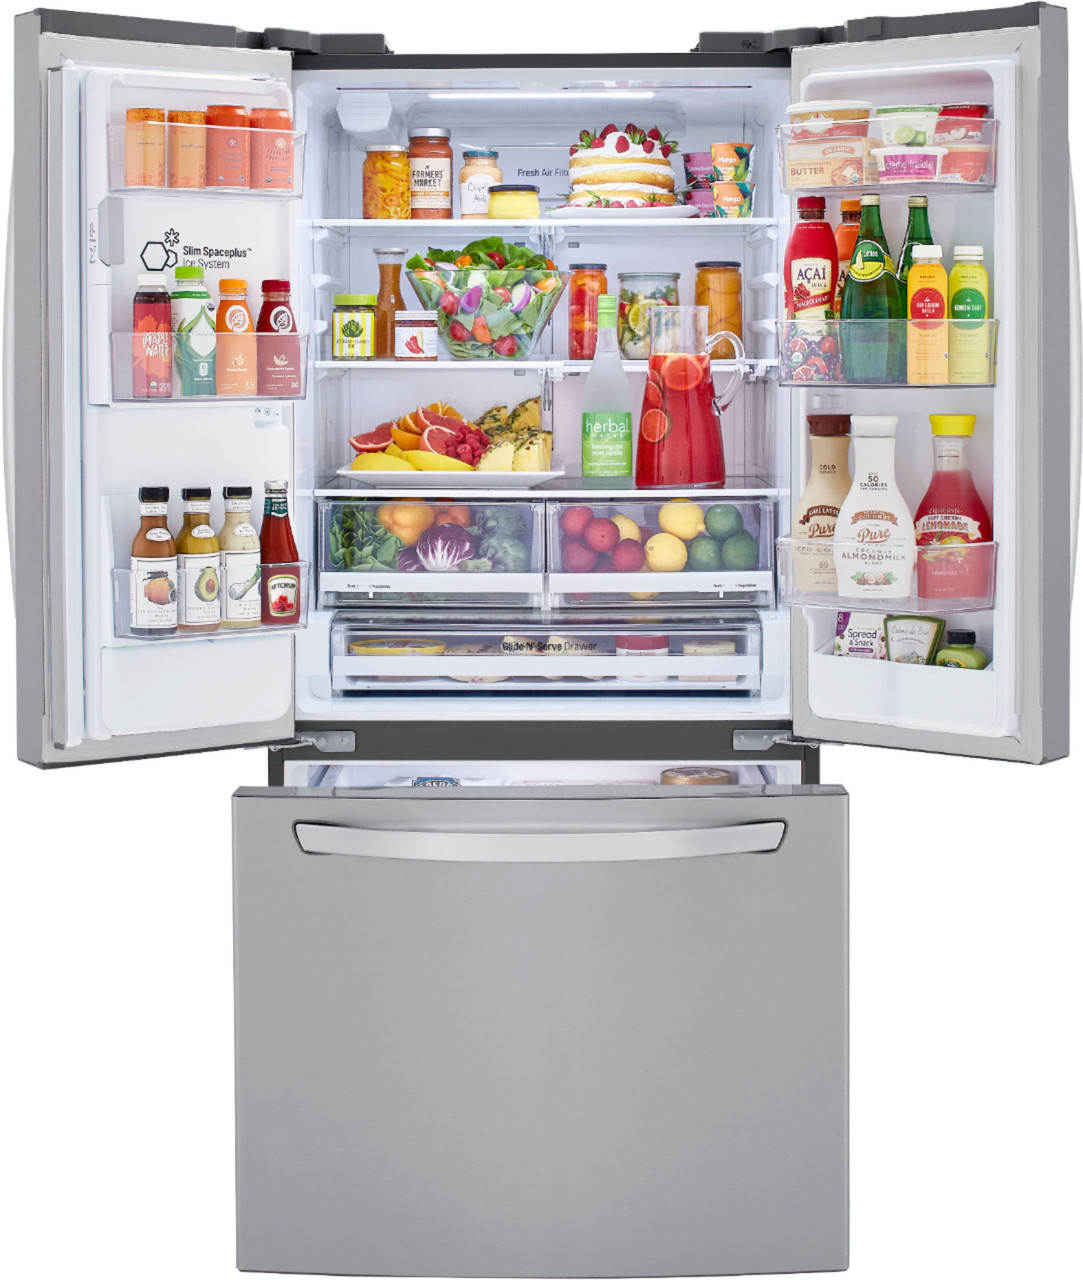 LG - 24.5 Cu. Ft. French Door Refrigerator with Wi-Fi - PrintProof Stainless Steel